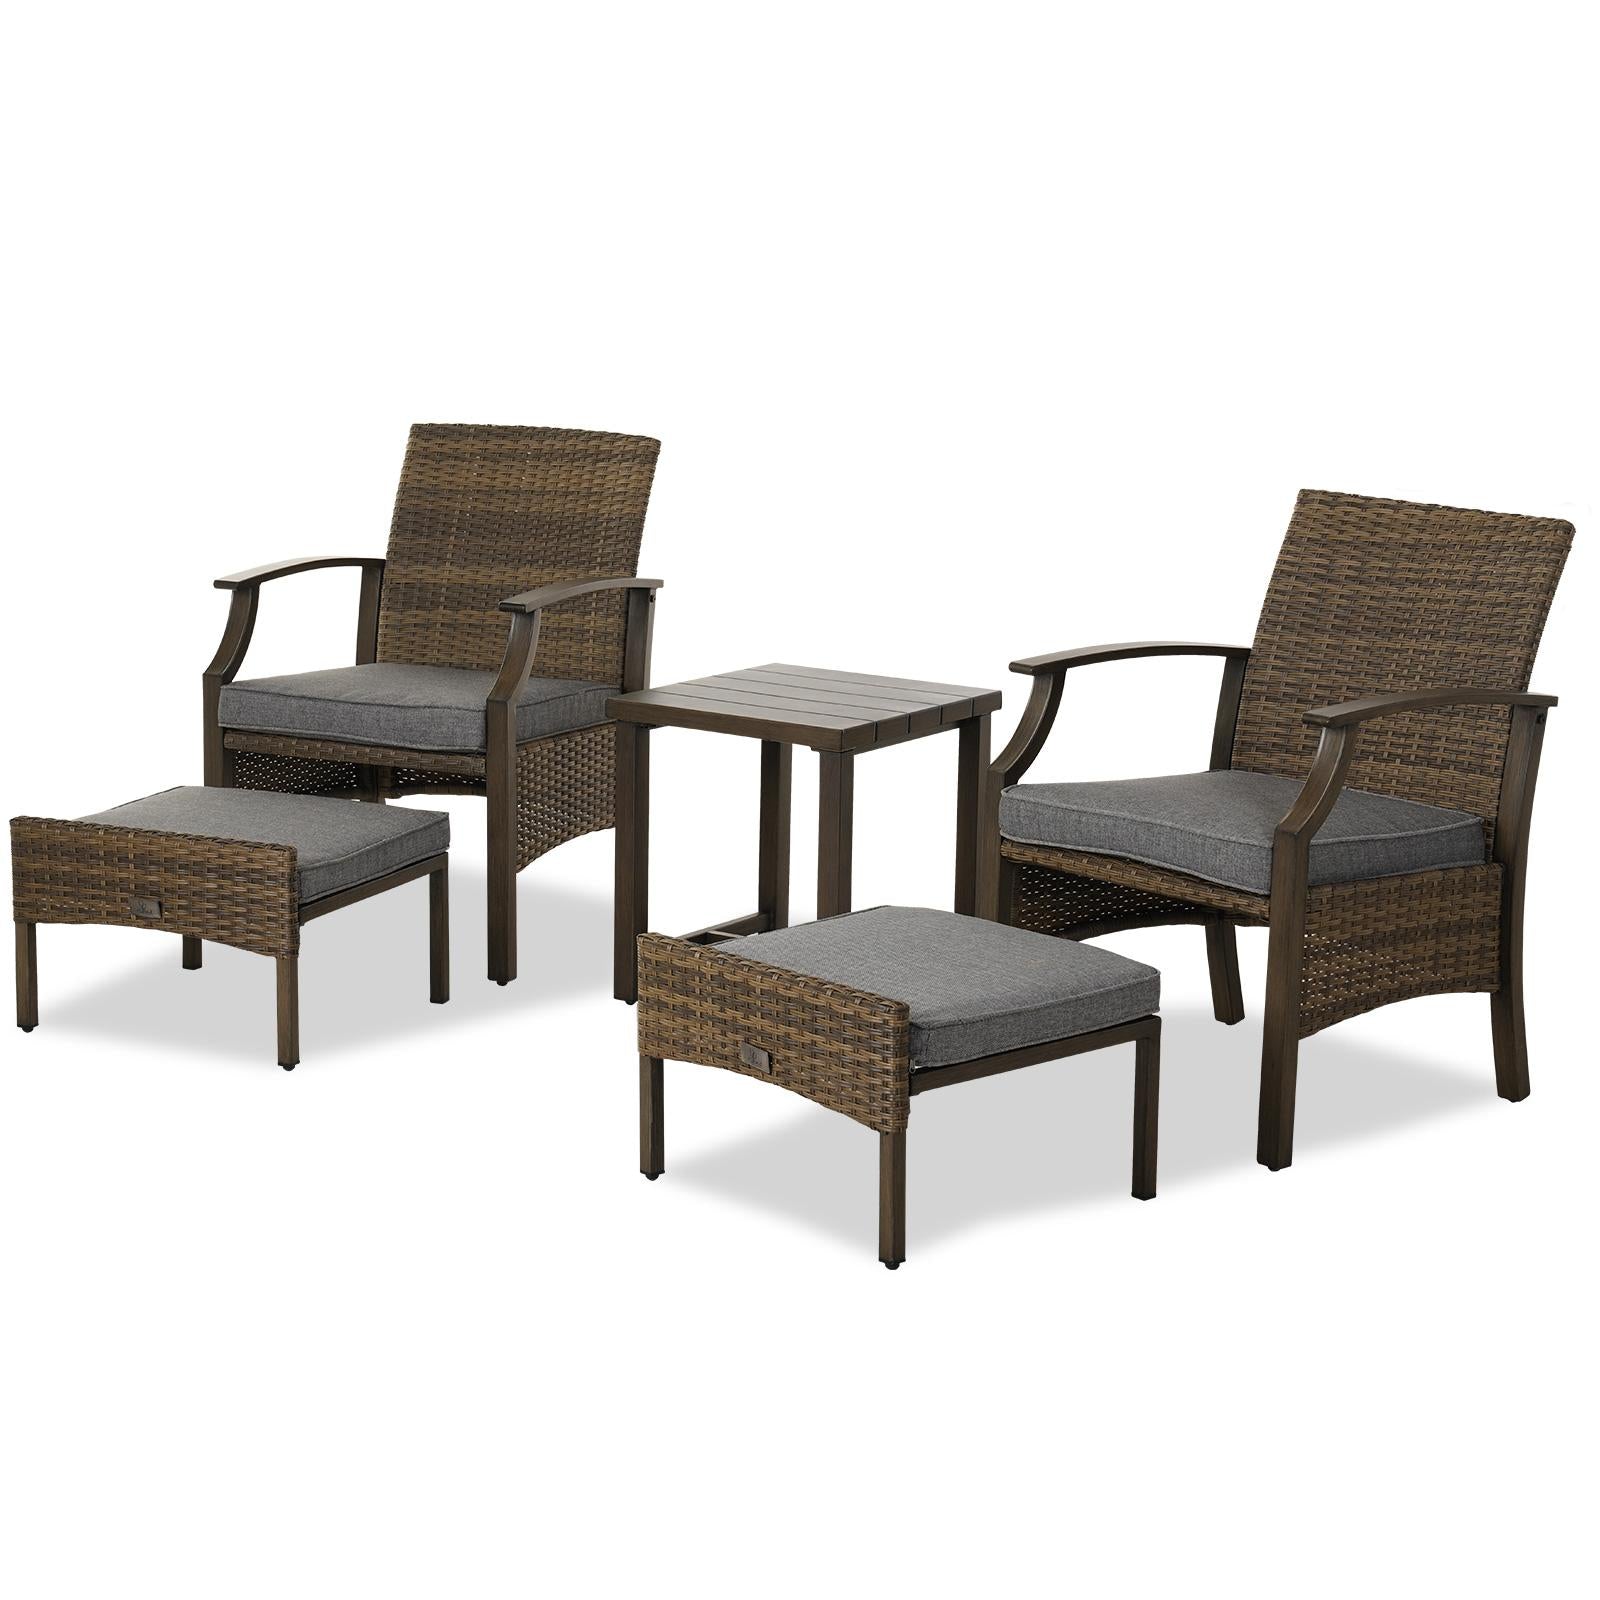 Outdoor Patio Chairs Set of 2 with Ottoman and Coffee Table 5 Piece Outdoor Patio Furniture Set